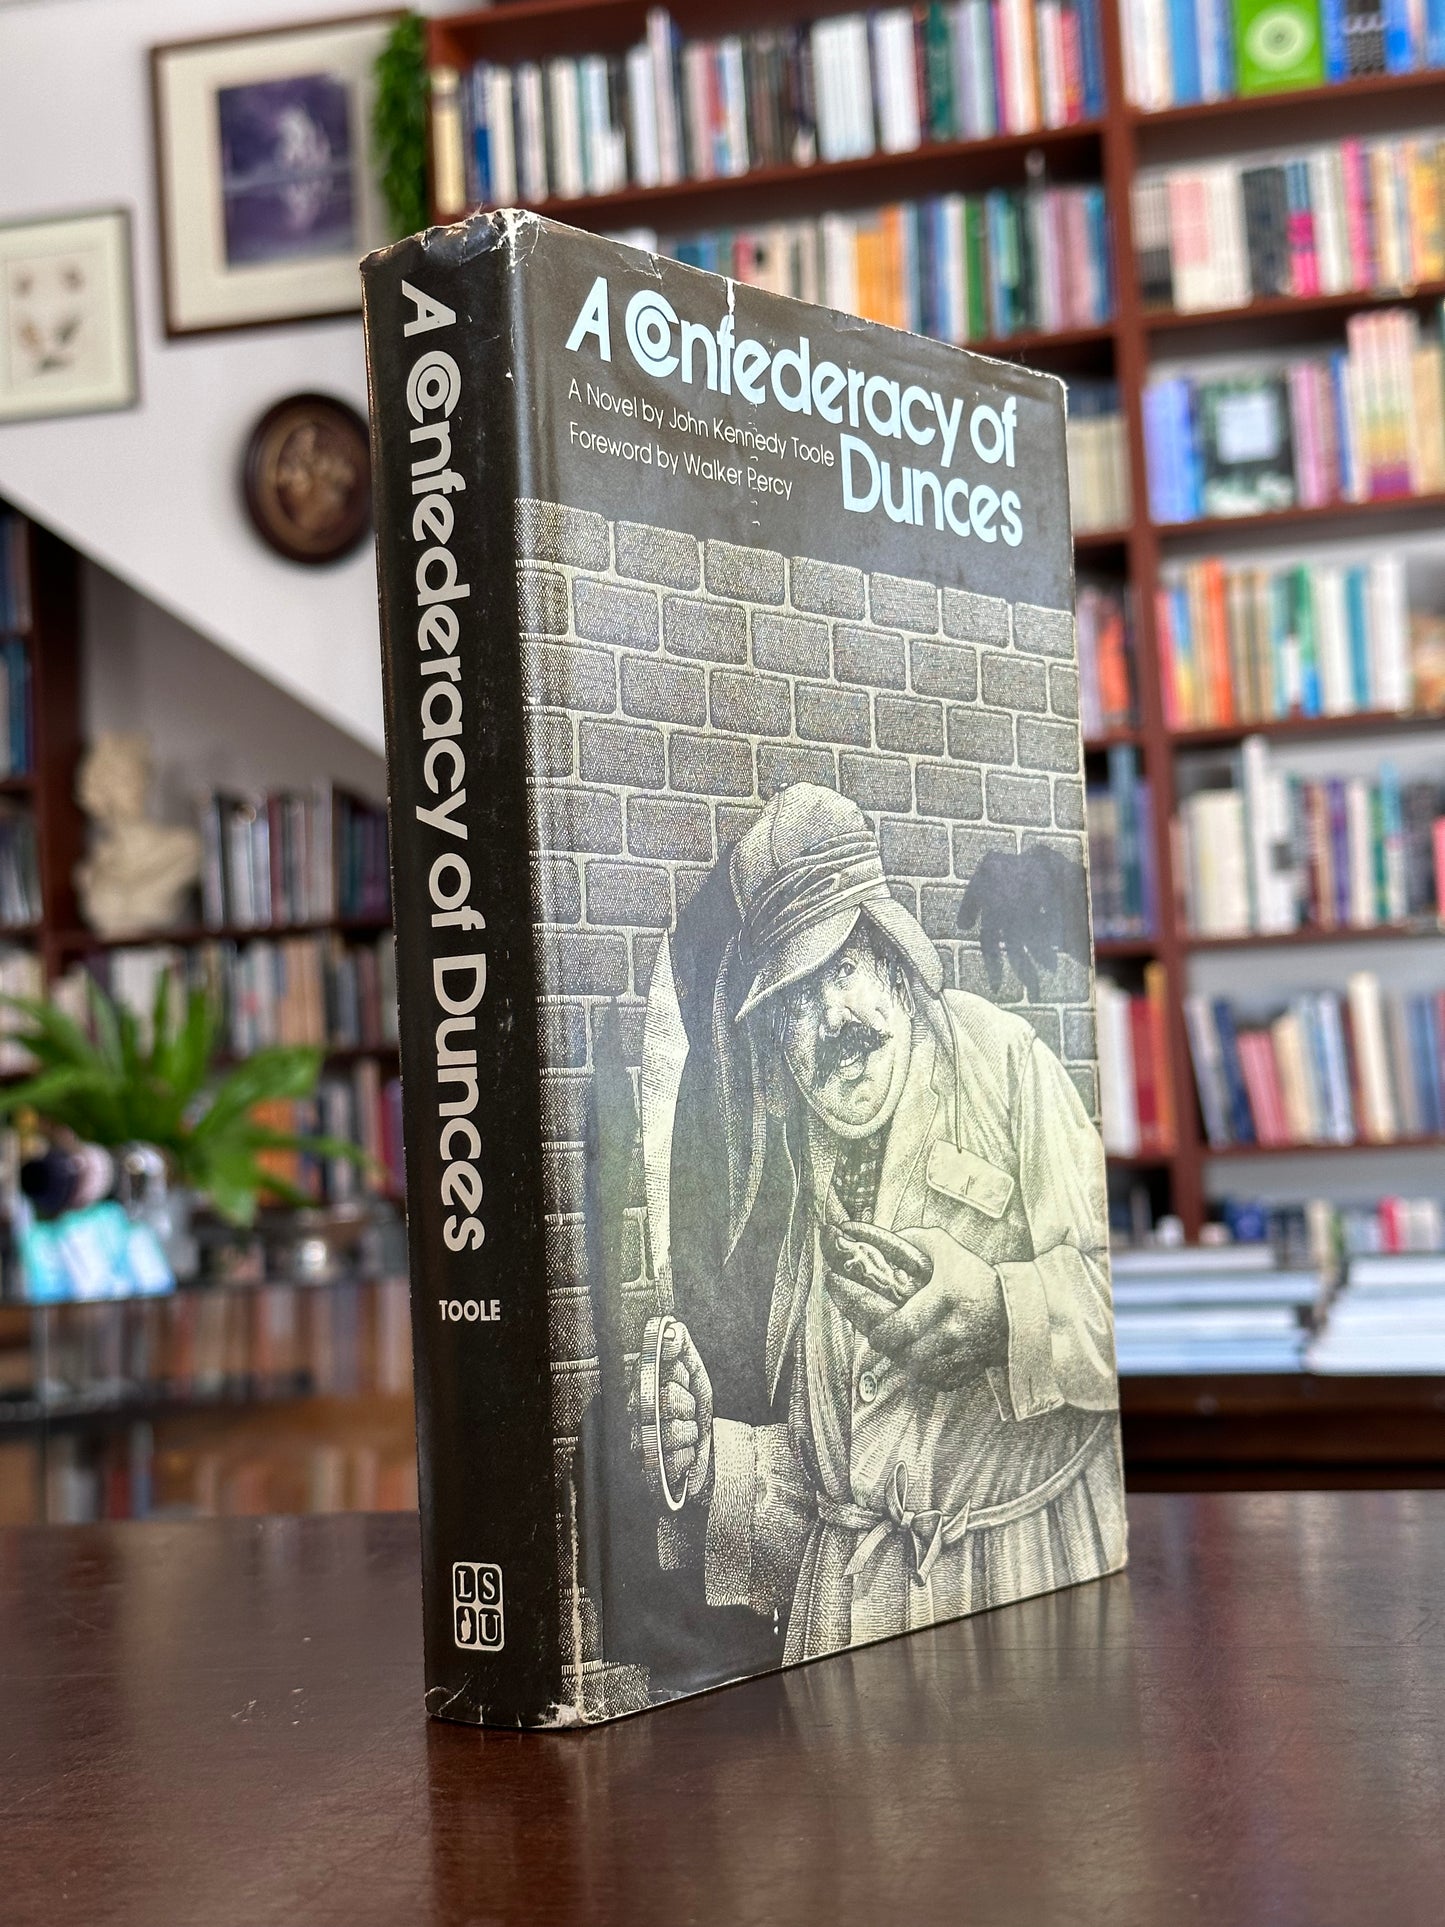 A Confederacy of Dunces by John Kennedy Toole (First Edition)